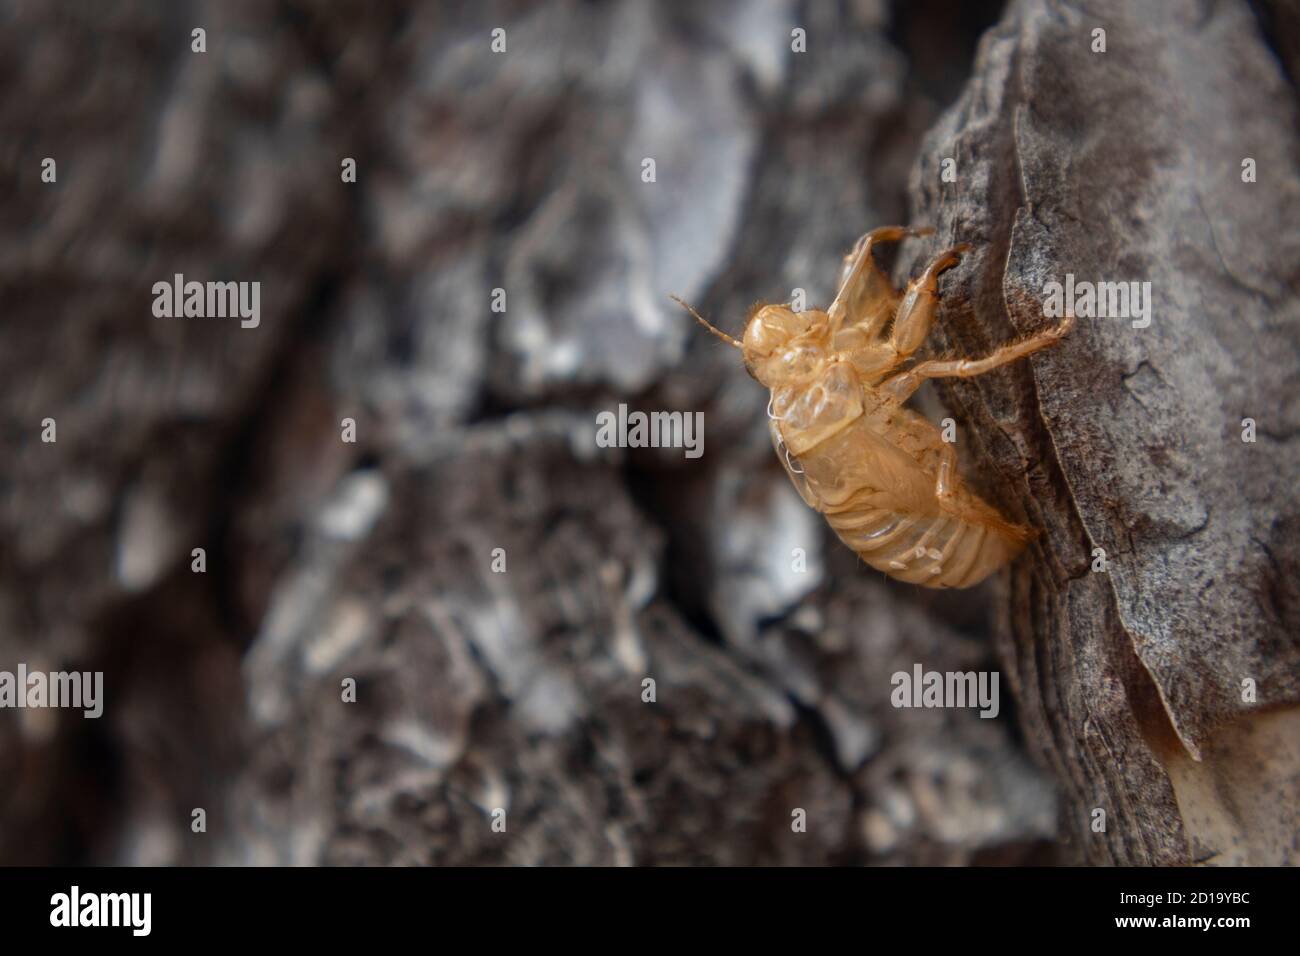 Empty cricket shell left standing on the rough, cracked pine tree bark  Stock Photo - Alamy